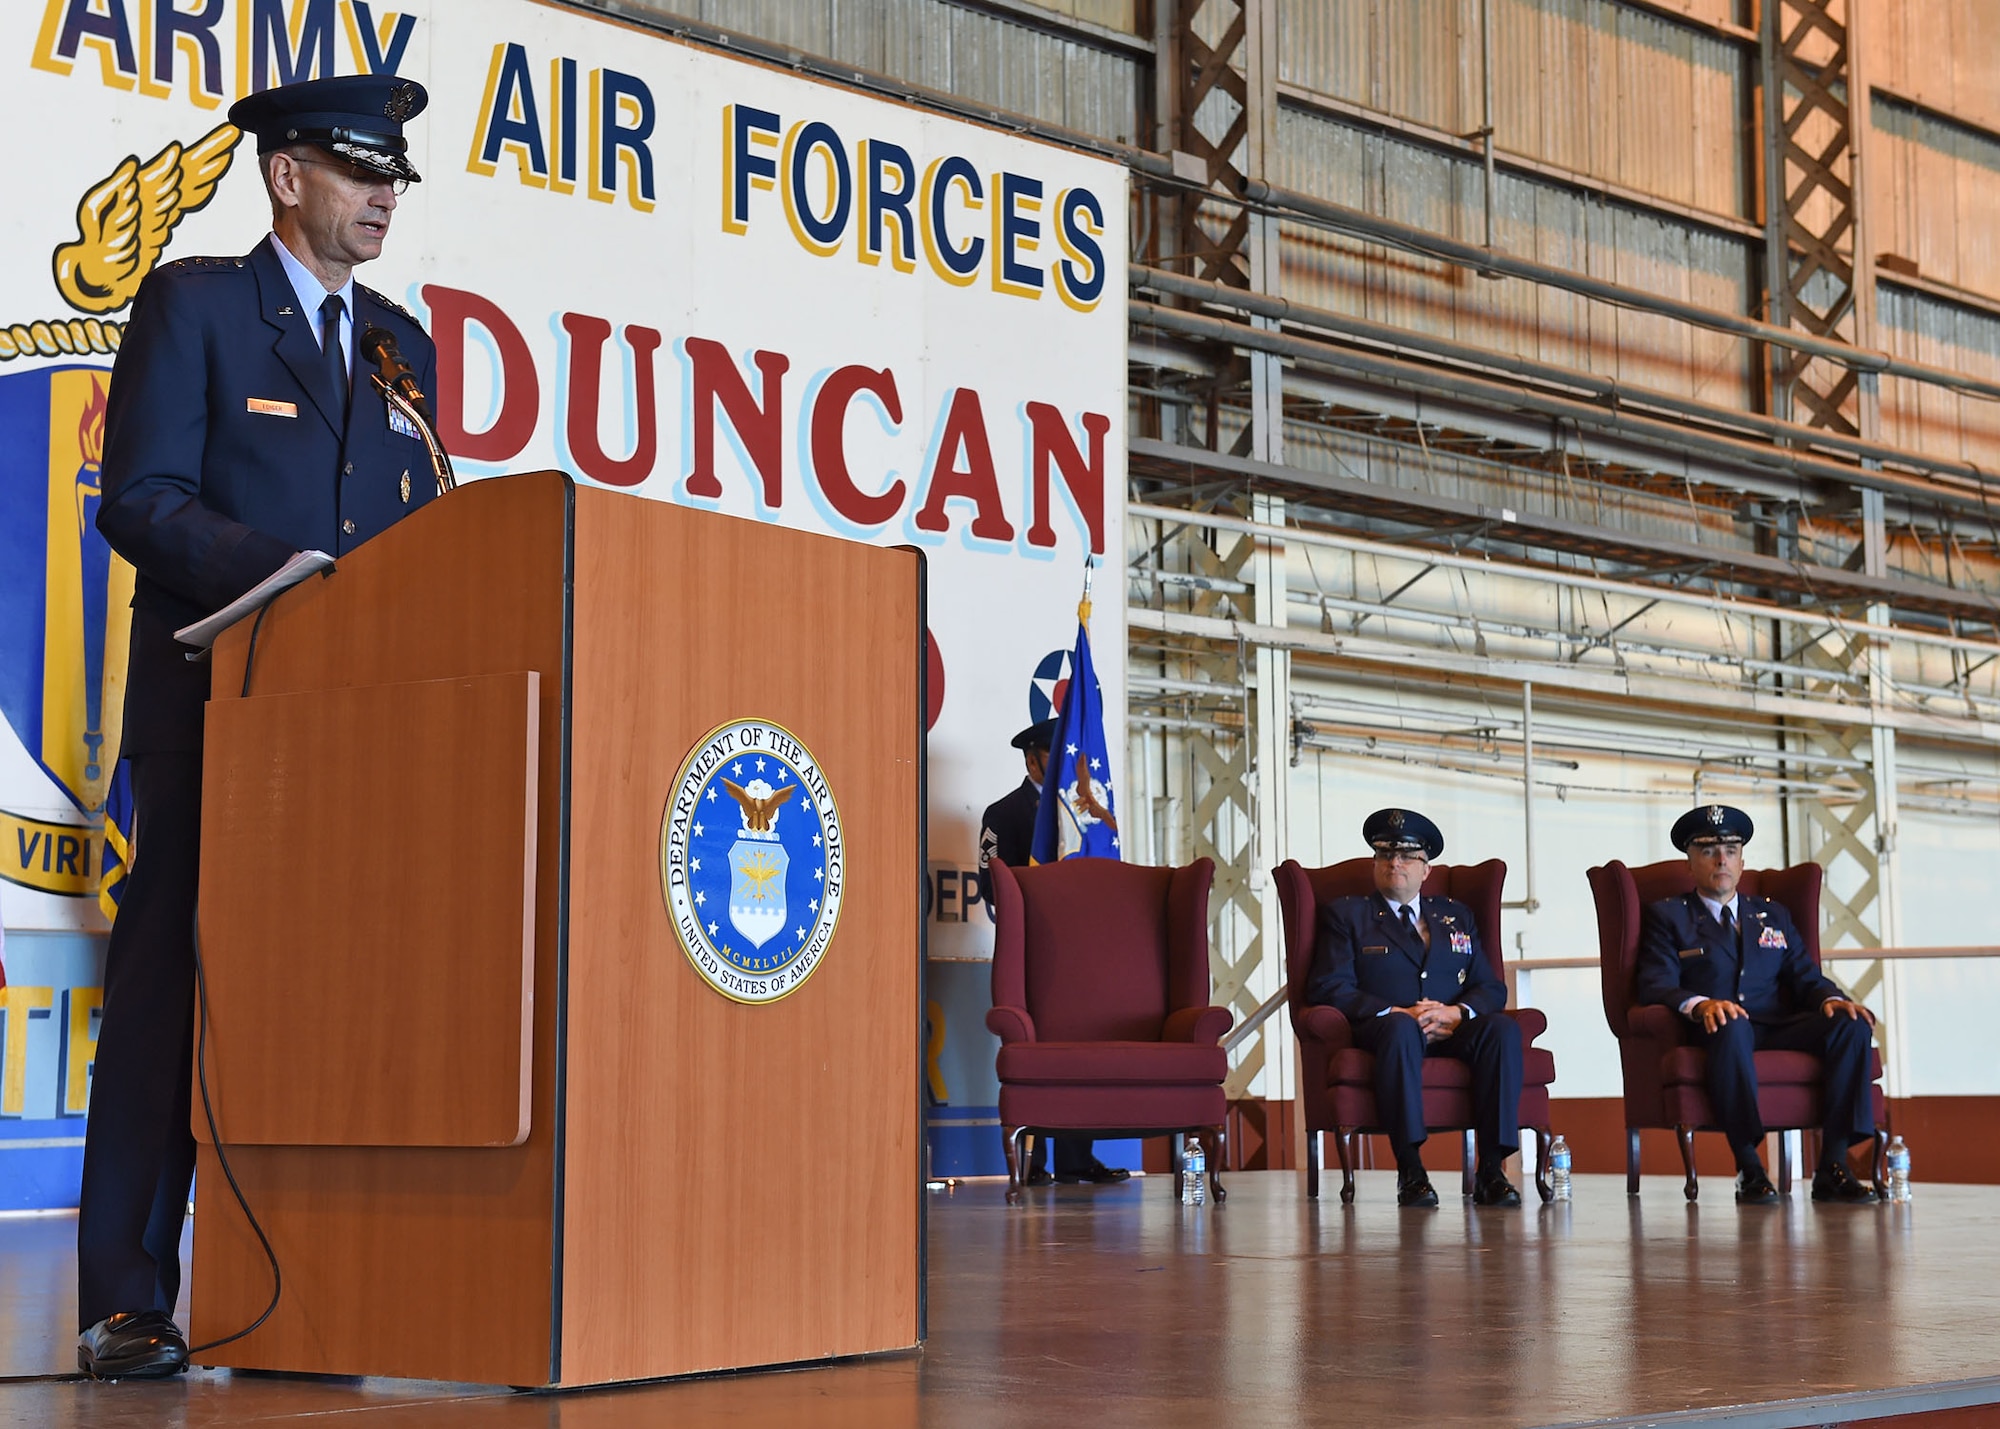 Lt. Gen. Mark A. Ediger, Surgeon General of the Air Force, speaks to members of the military medical community during the May 6 Air Force Medical Operations Agency change-of-command ceremony at nearby Port San Antonio. (U.S. Air Force photo / Tech. Sgt. Christopher Carwile.)